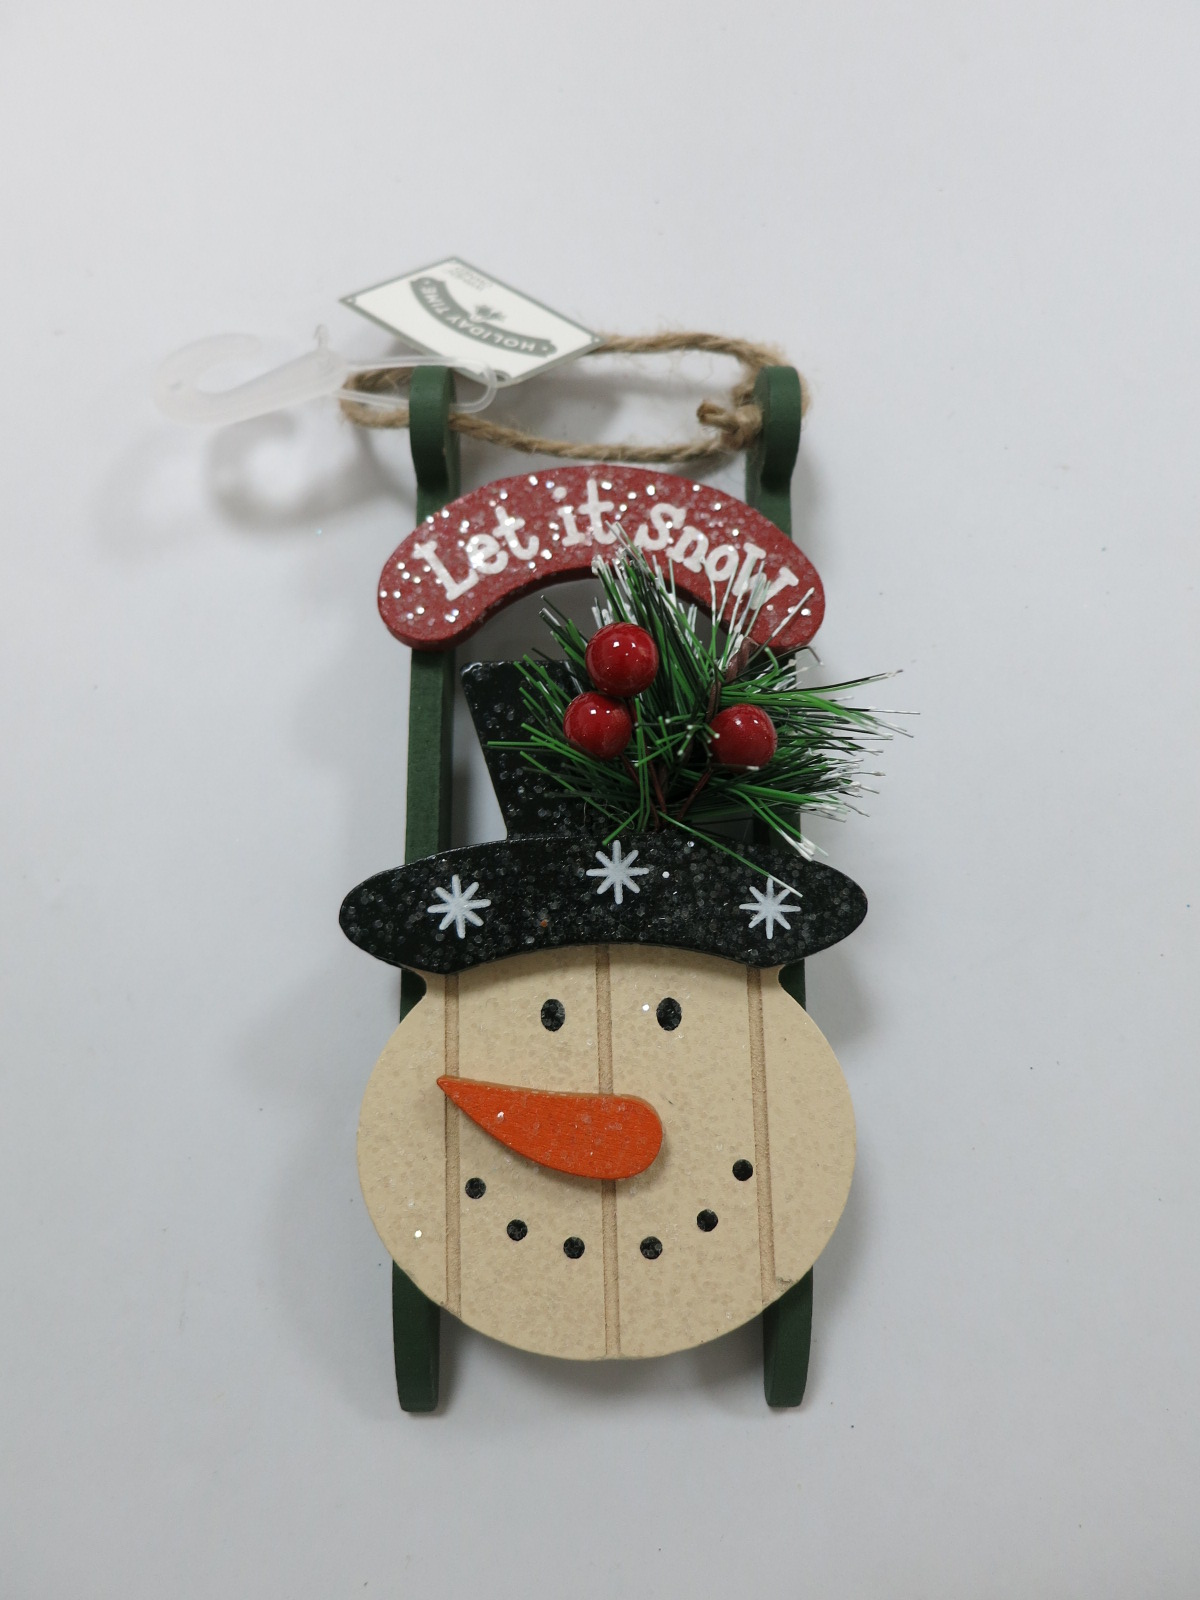 Holiday Time Snowman Sleigh Wooden Christmas Ornament - image 1 of 4